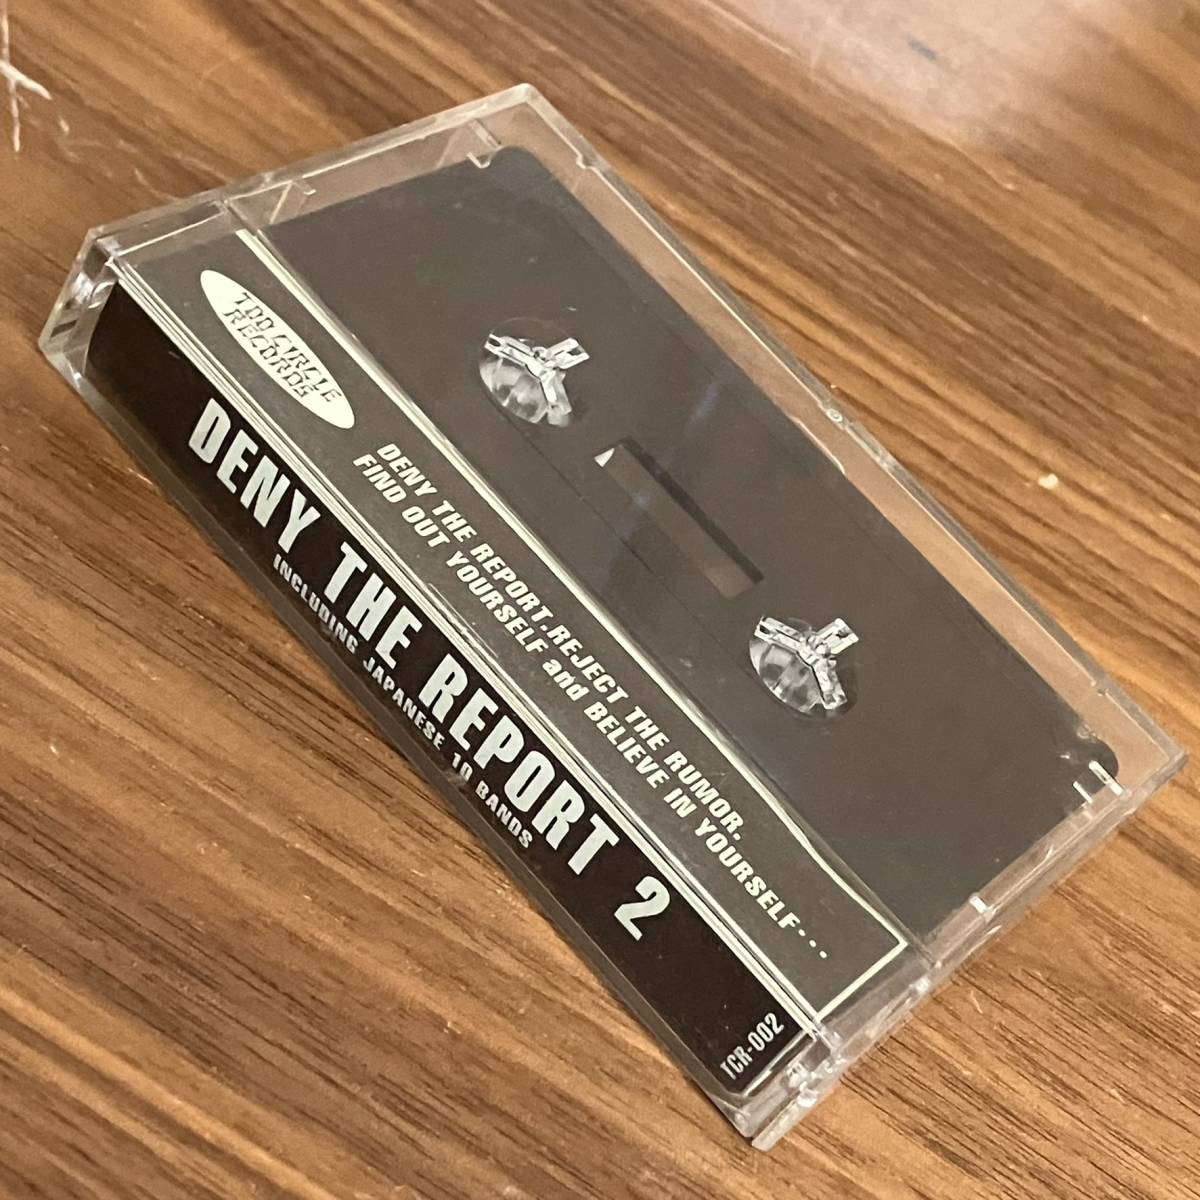 V.A [ DENY THE REPORT 2 ] cassette tape / TCR-002(TOO CIRCLE RECORDS)